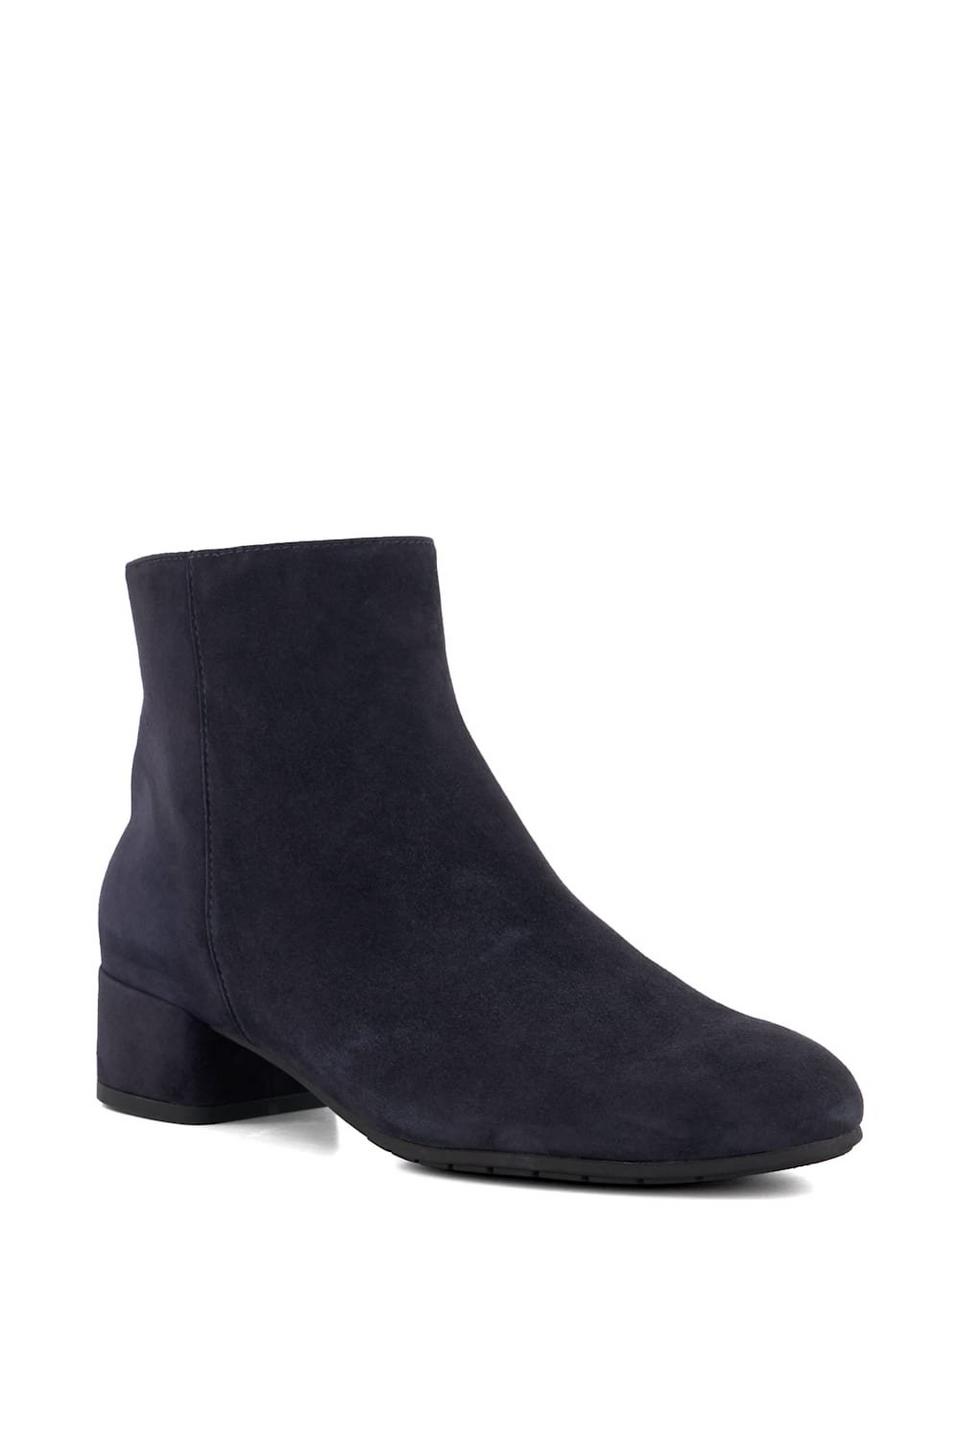 Boots | 'Pippie' Suede Ankle Boots | Dune London